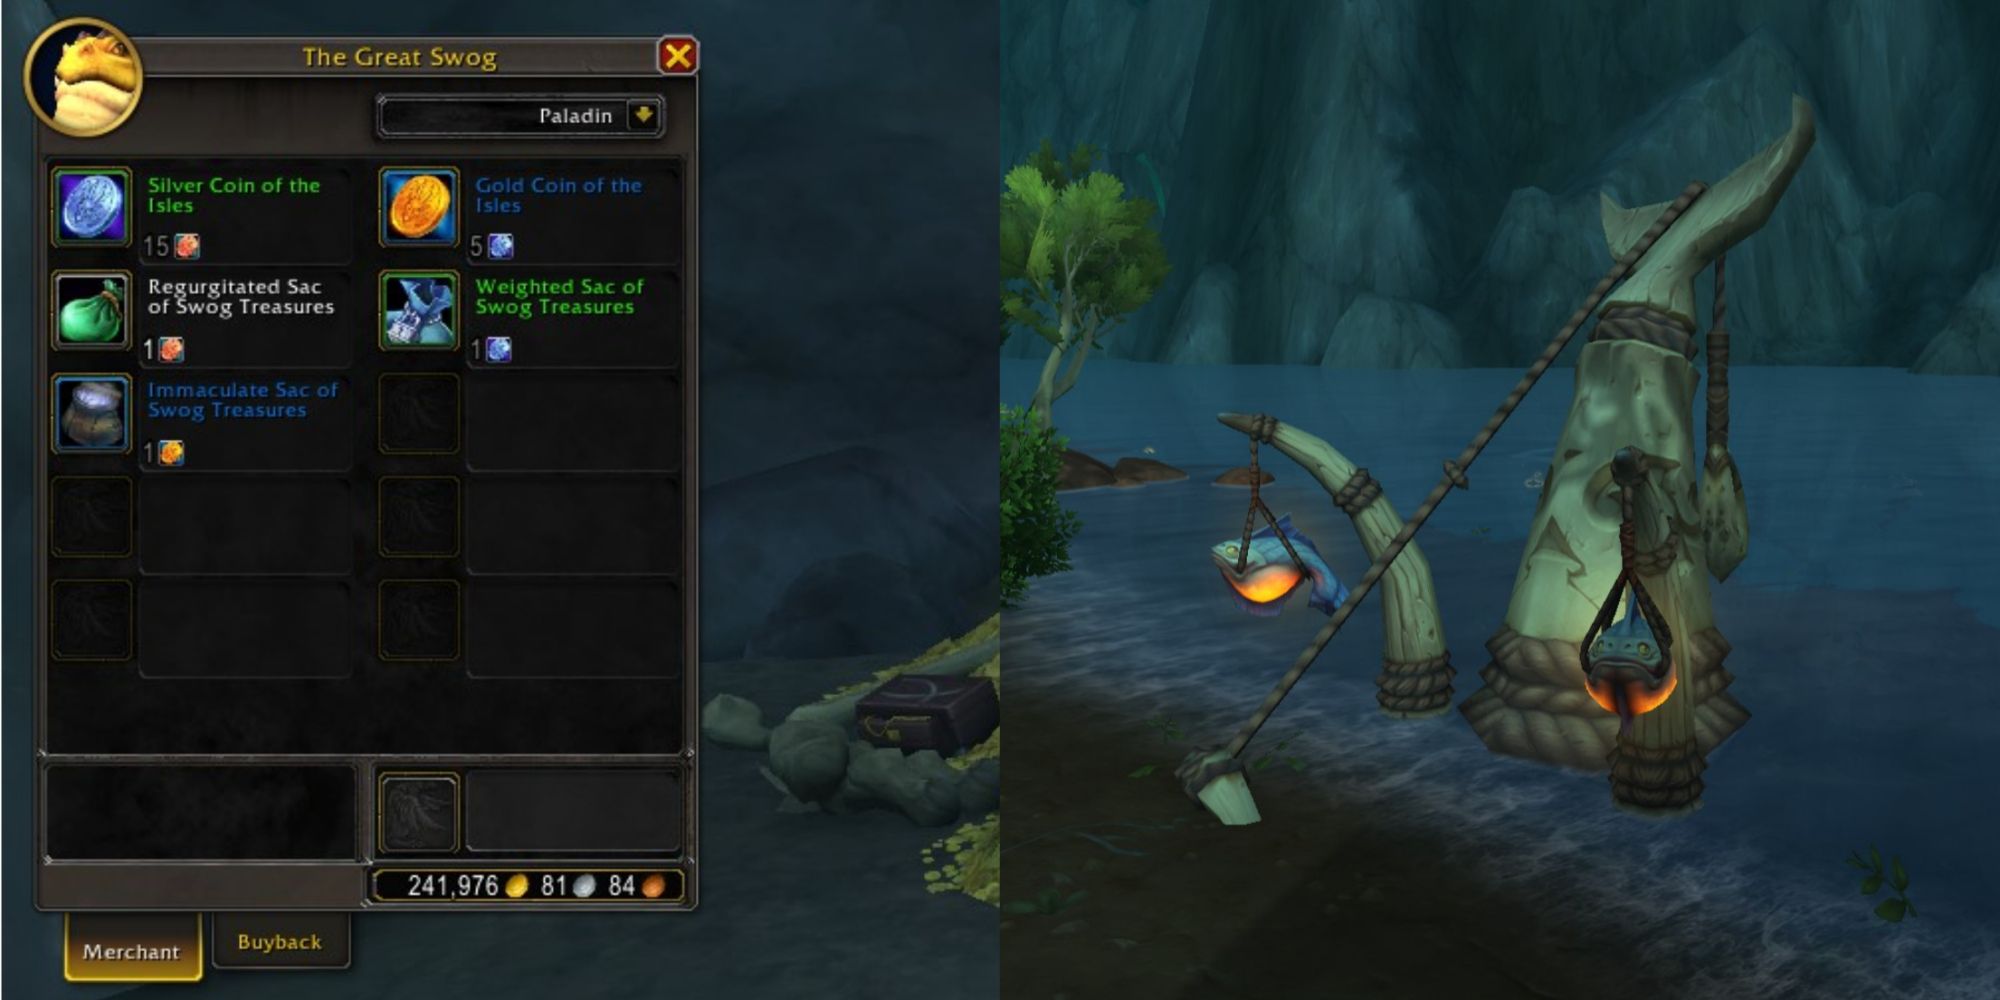 World Of Warcraft Dragonflight Coins Of The Isles Vendor Prices And Lunker Spawn